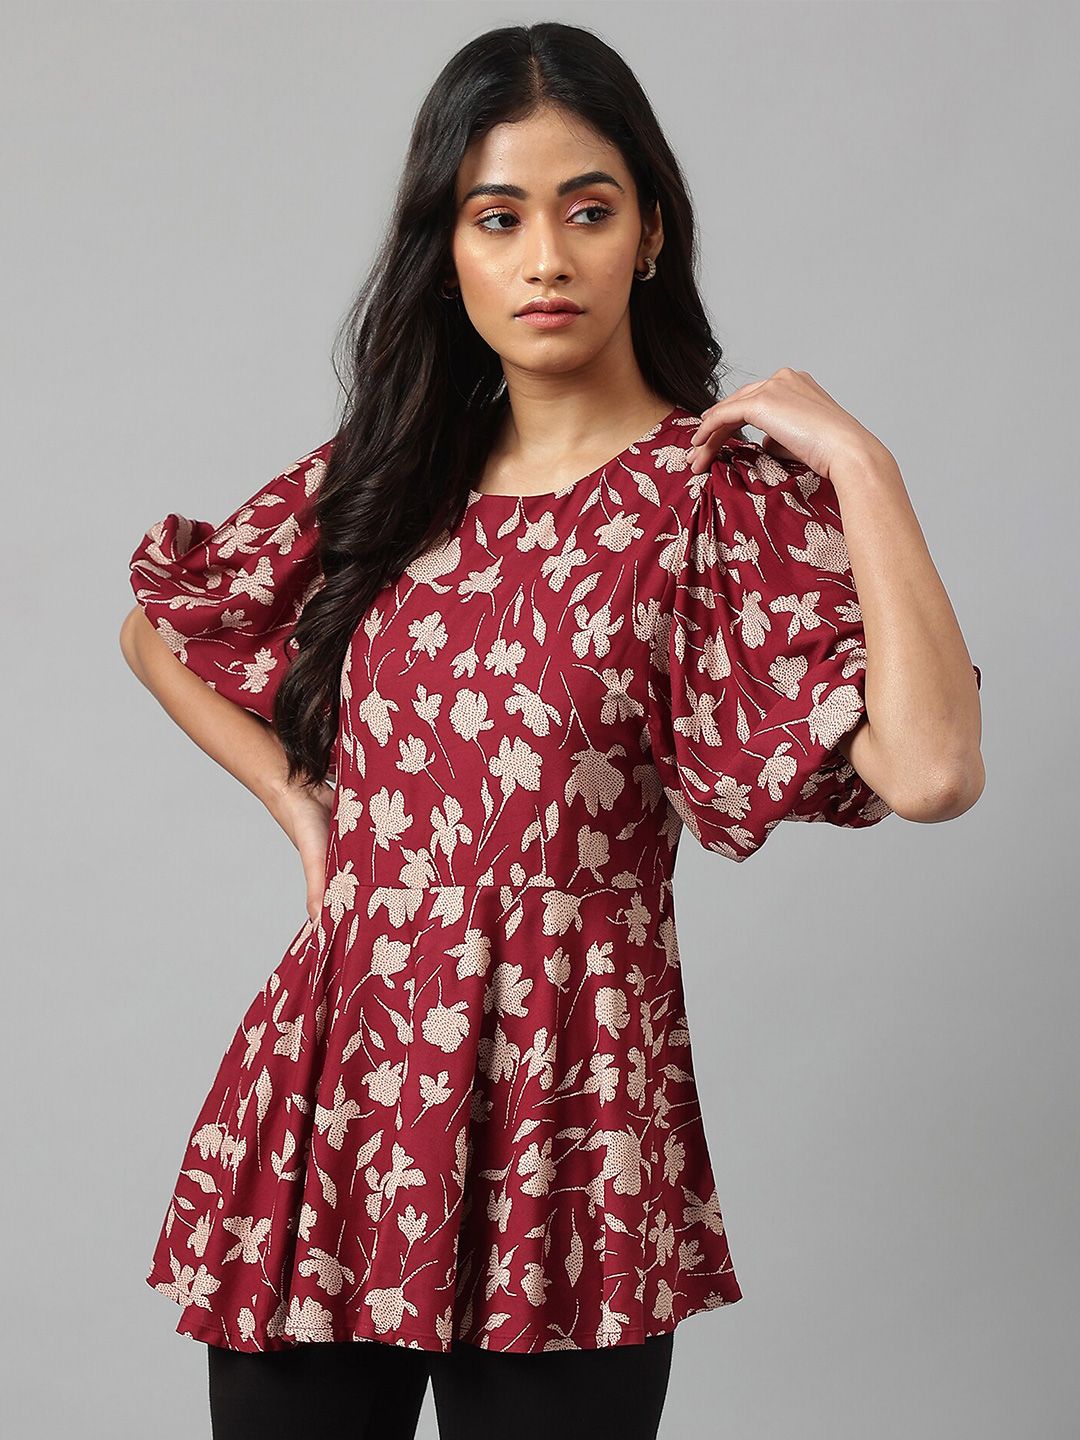 W Red Floral Print Peplum Top Price in India